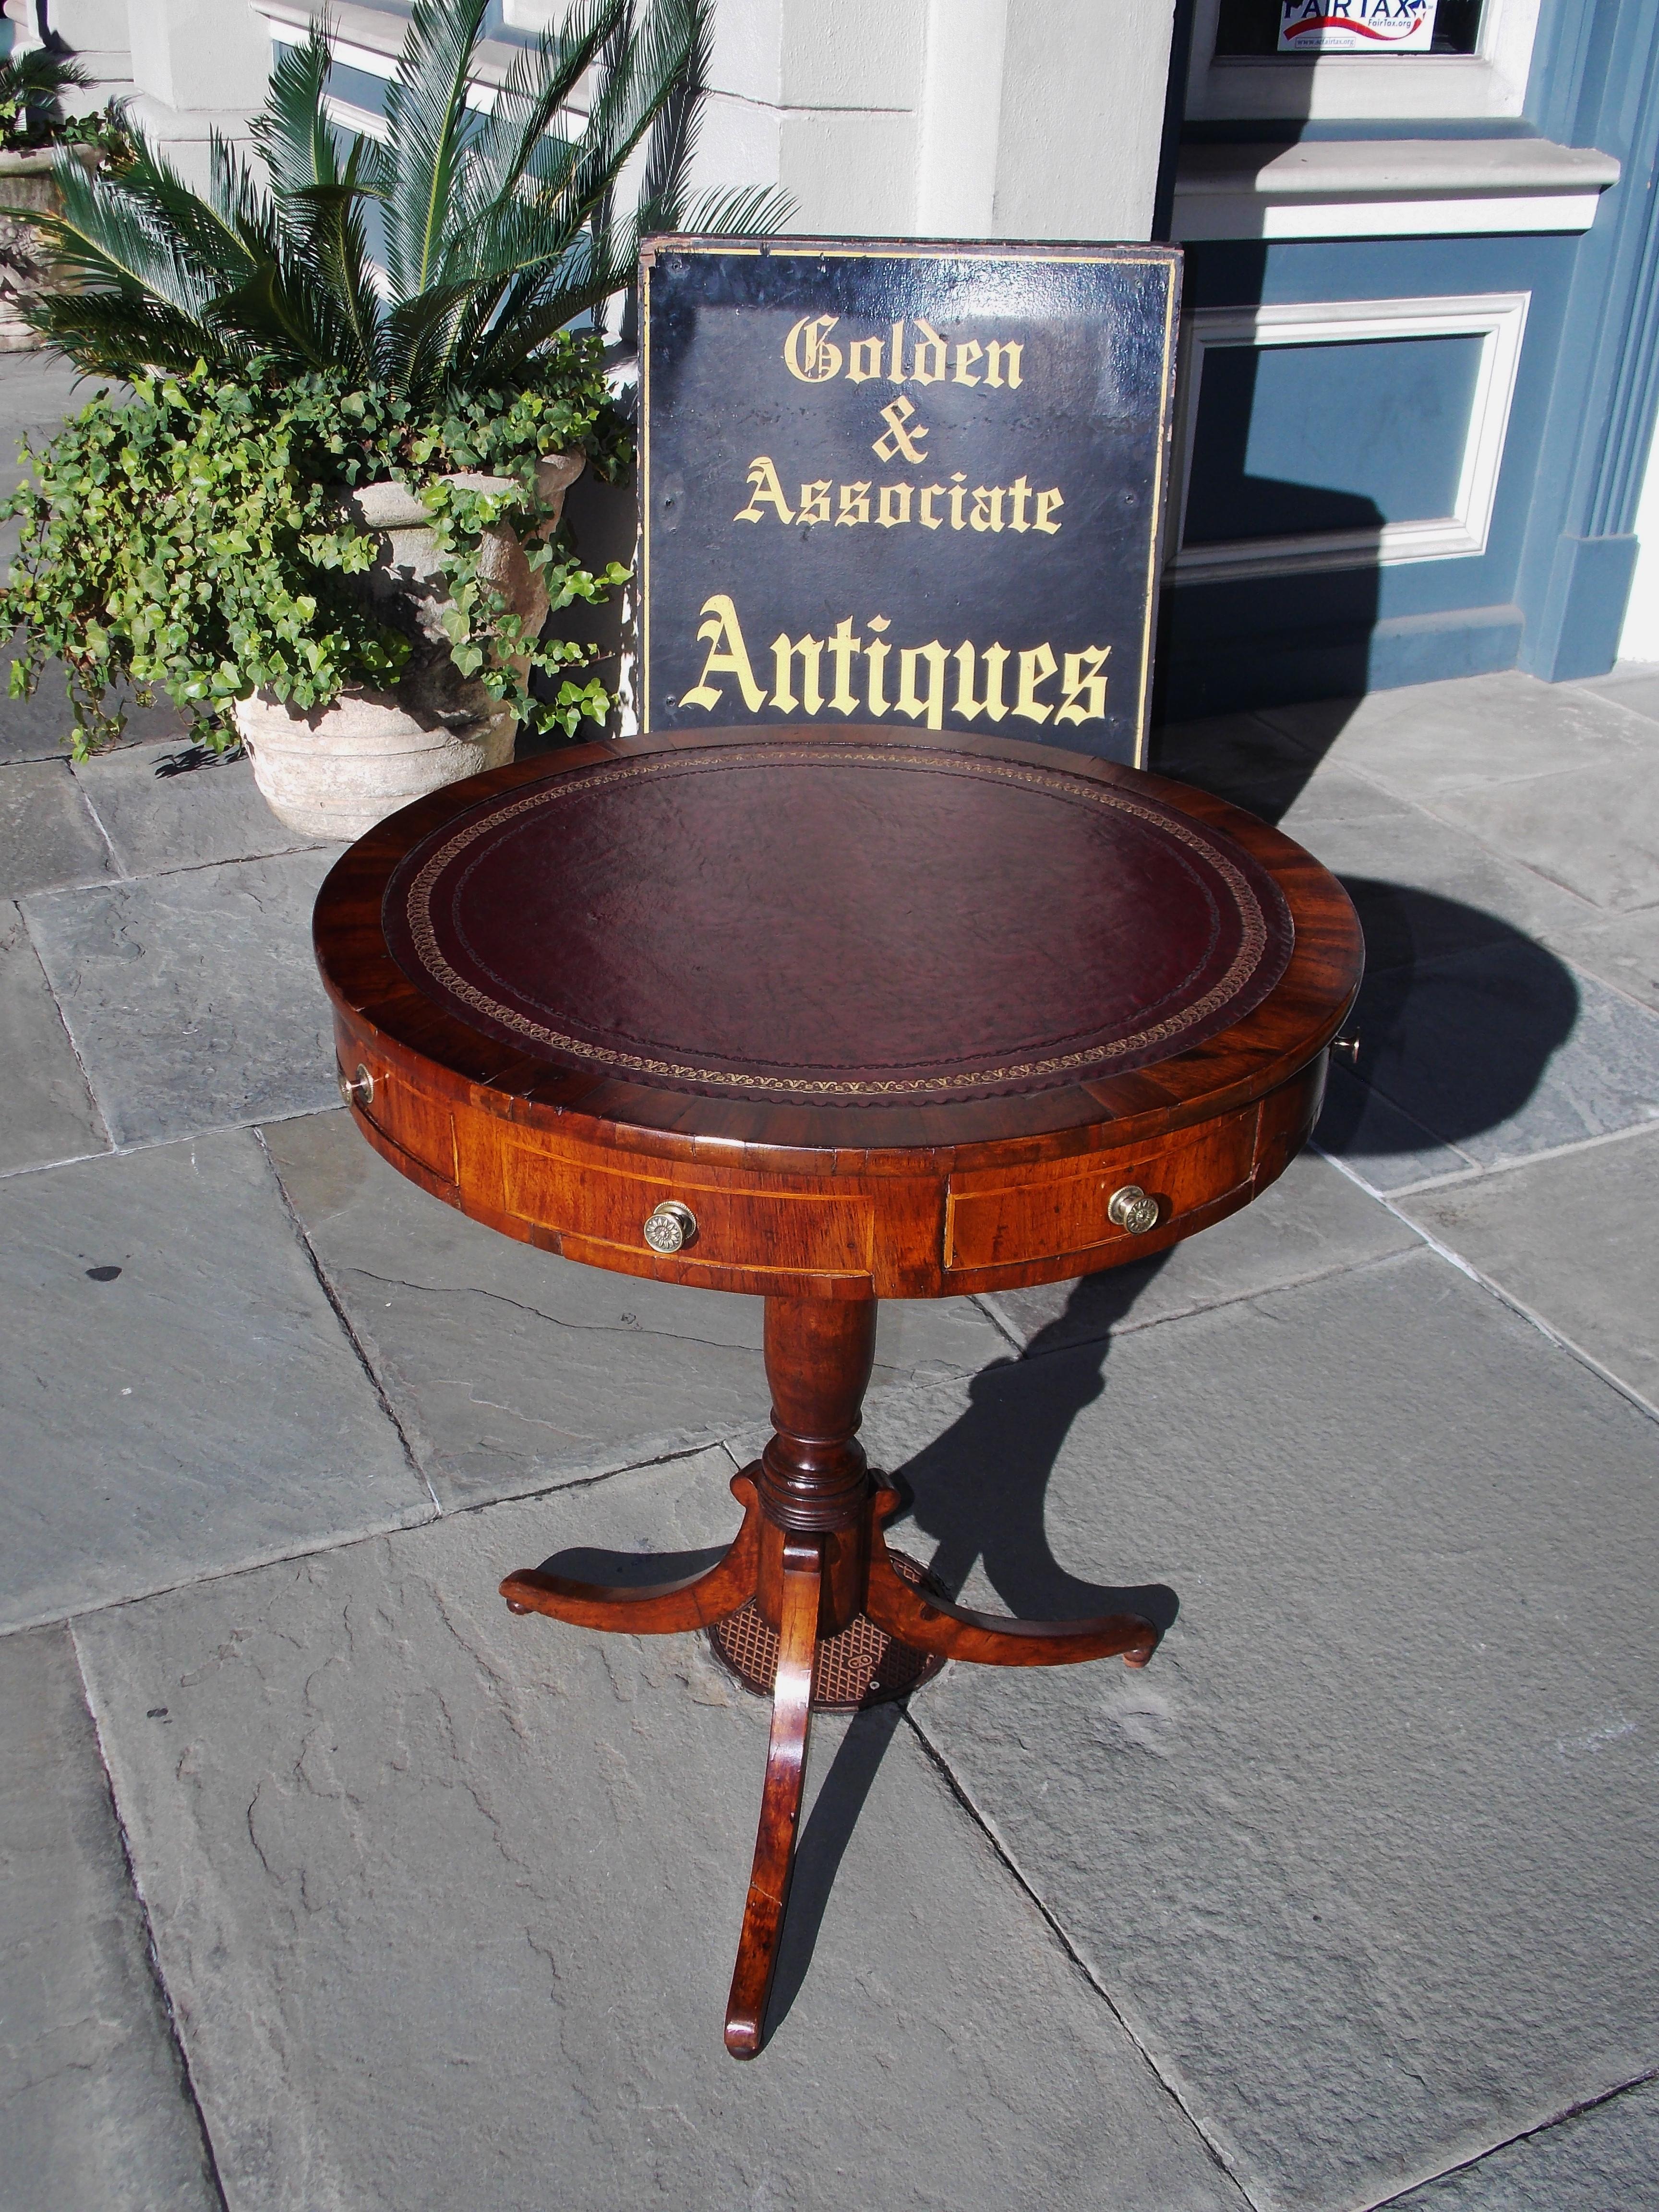 English Regency mahogany circular drum table with a red leather top and gilt tooling, alternating satinwood inlaid drawers with period floral brasses, carved turned bulbous ringed pedestal , and terminating on the original splayed legs with ball